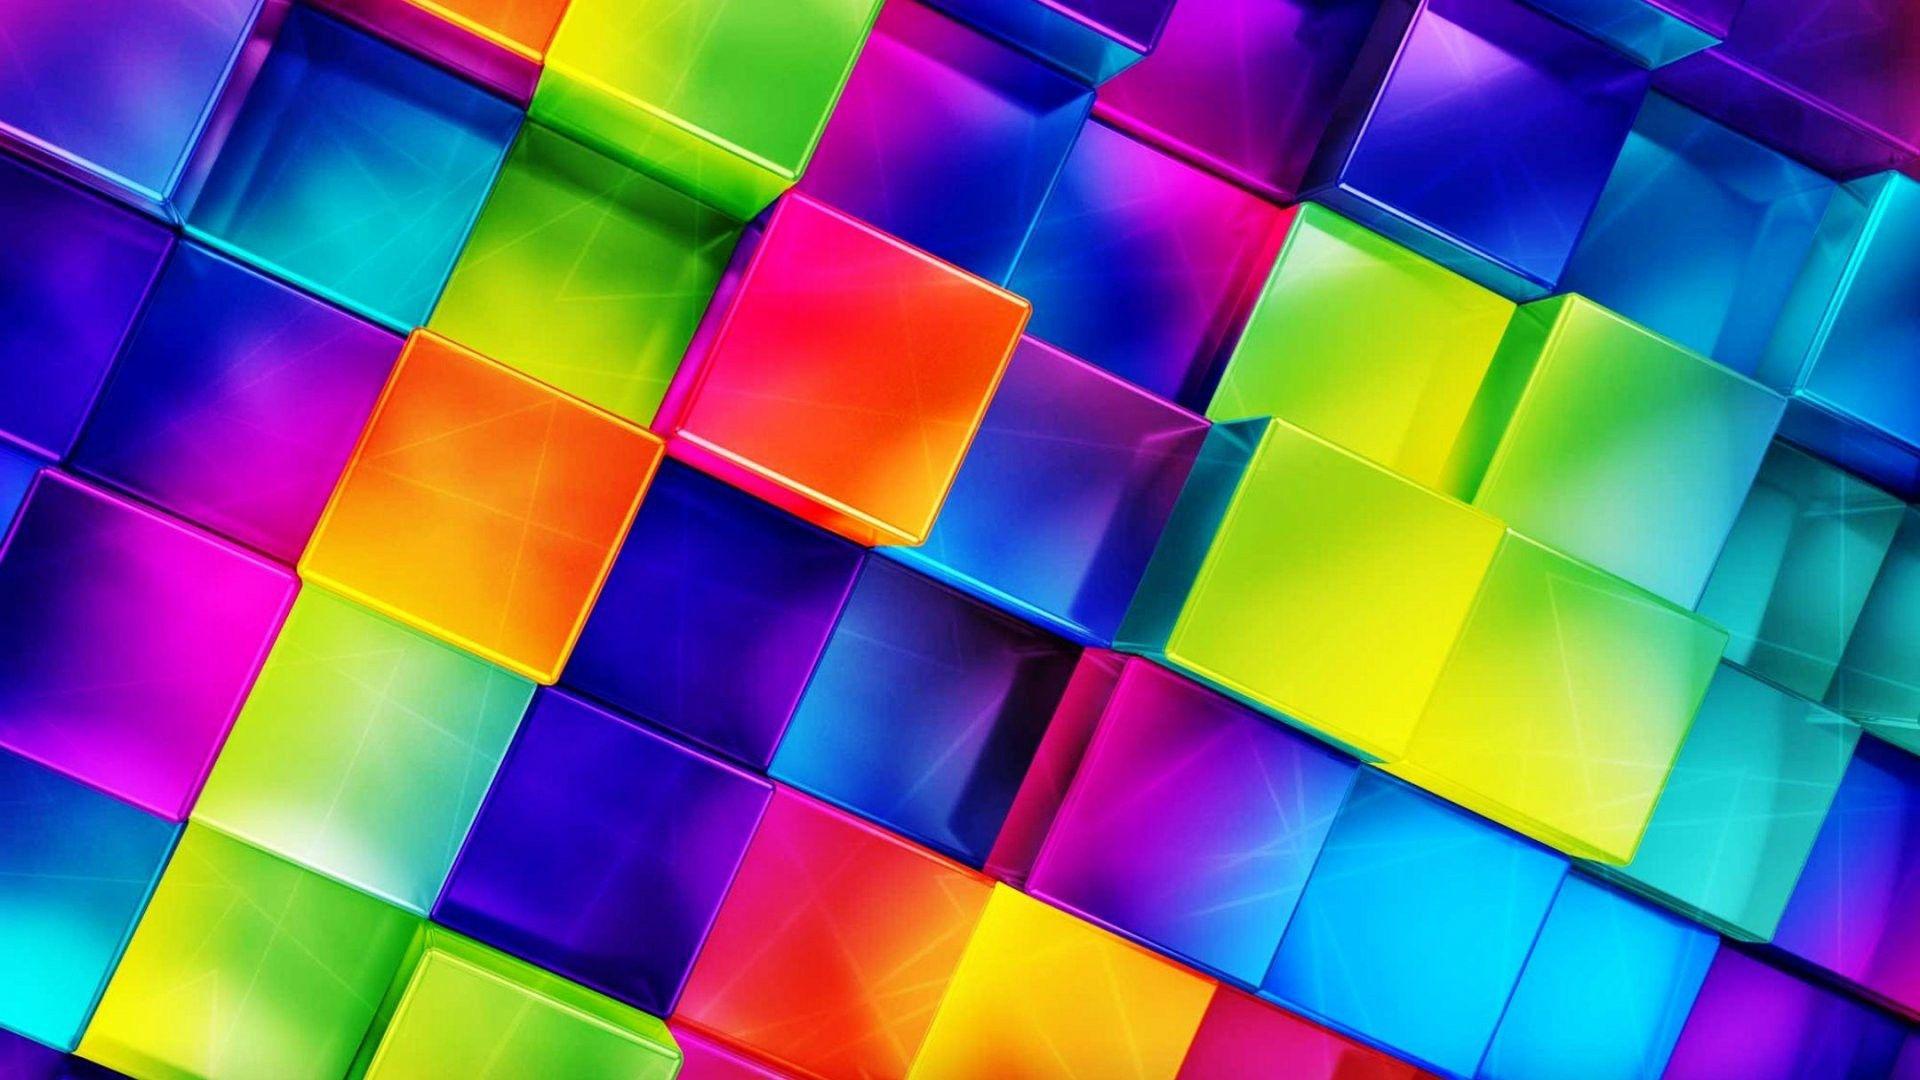 Rainbow Gradient Abstract Wallpaper Phone Wallpaper Images Colorful ...